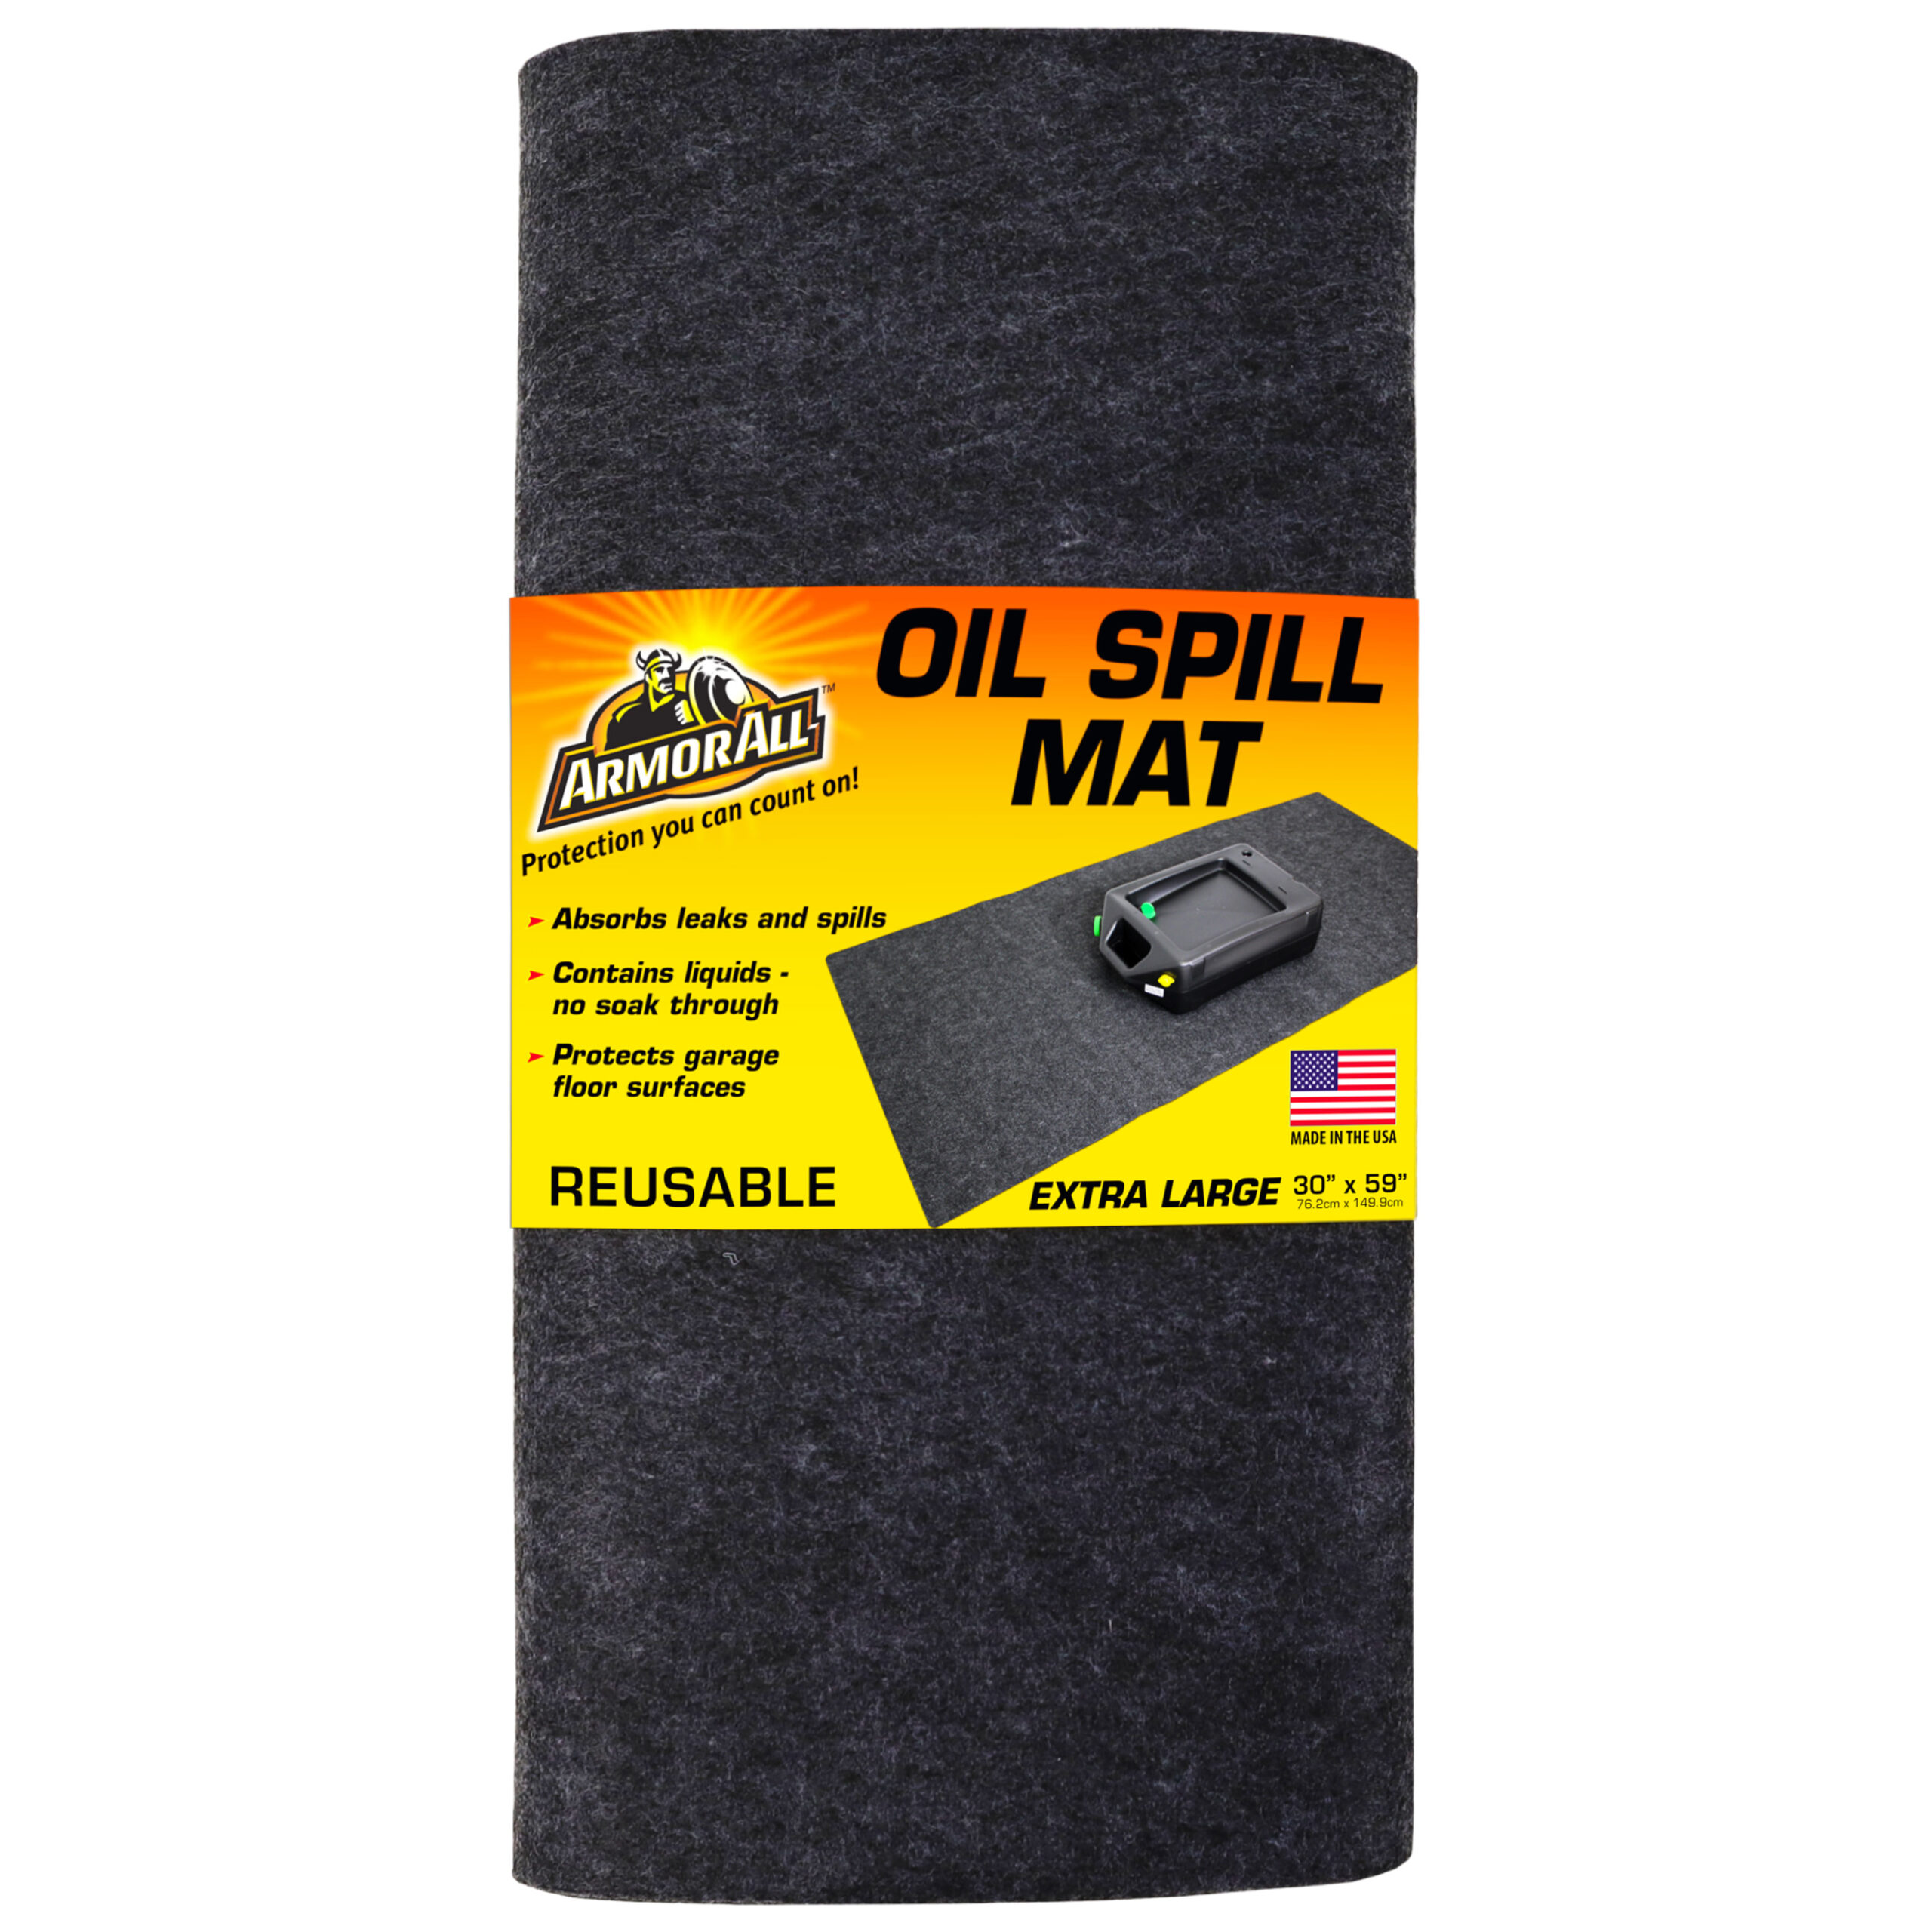 https://drymate.com/wp-content/uploads/2020/01/AA-OIL-SPILL-MAT-MAIN-PIC-No-Tape-scaled.jpg